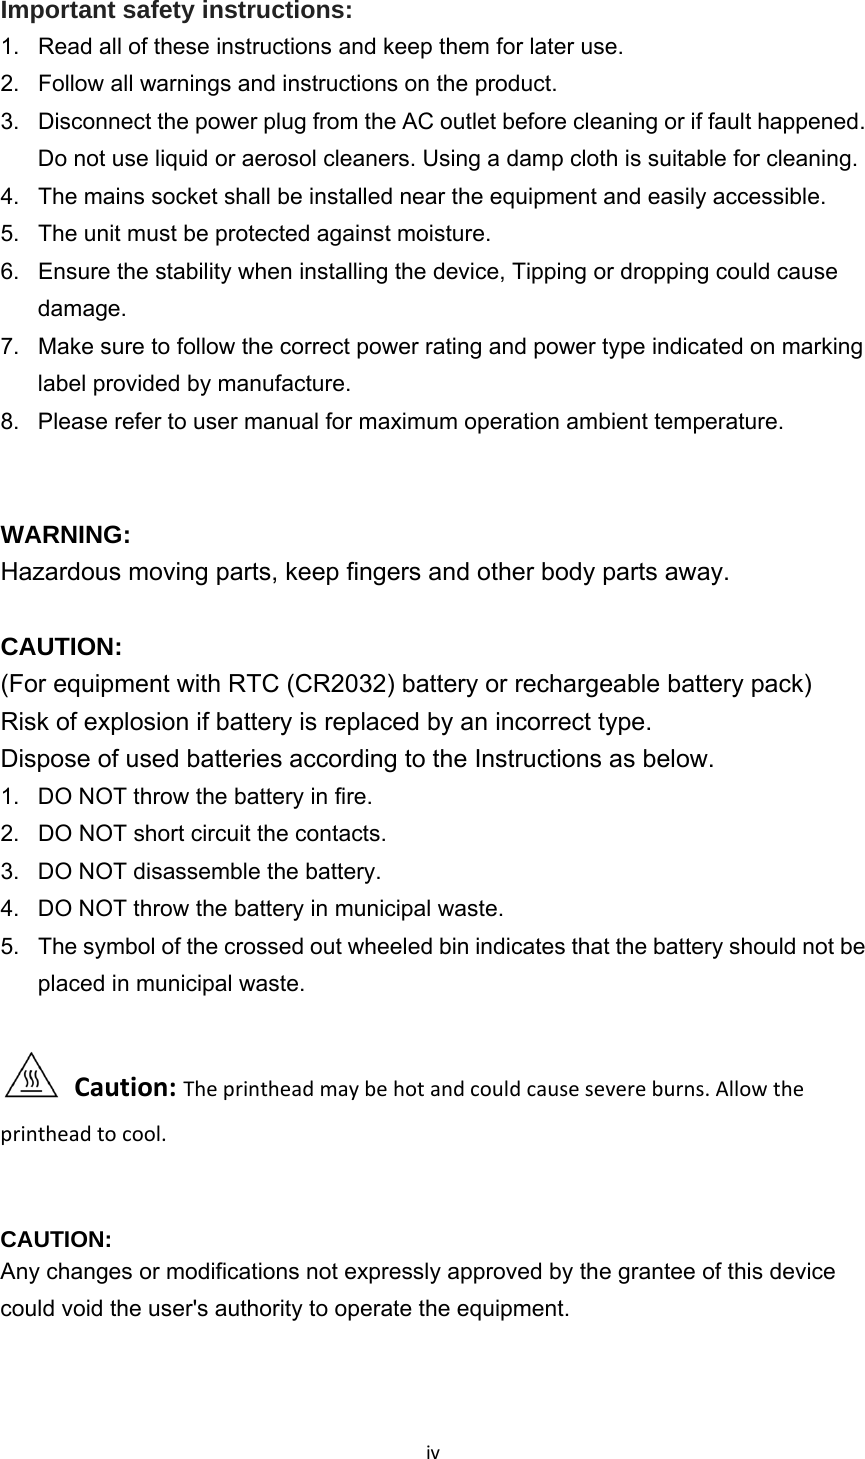 ivImportant safety instructions: 1.  Read all of these instructions and keep them for later use. 2.  Follow all warnings and instructions on the product. 3.  Disconnect the power plug from the AC outlet before cleaning or if fault happened.   Do not use liquid or aerosol cleaners. Using a damp cloth is suitable for cleaning. 4.  The mains socket shall be installed near the equipment and easily accessible. 5.  The unit must be protected against moisture. 6.  Ensure the stability when installing the device, Tipping or dropping could cause damage. 7.  Make sure to follow the correct power rating and power type indicated on marking label provided by manufacture. 8.  Please refer to user manual for maximum operation ambient temperature.     WARNING:  Hazardous moving parts, keep fingers and other body parts away.  CAUTION:  (For equipment with RTC (CR2032) battery or rechargeable battery pack) Risk of explosion if battery is replaced by an incorrect type. Dispose of used batteries according to the Instructions as below.   1.  DO NOT throw the battery in fire.   2.  DO NOT short circuit the contacts.   3.  DO NOT disassemble the battery.   4.  DO NOT throw the battery in municipal waste.   5.  The symbol of the crossed out wheeled bin indicates that the battery should not be placed in municipal waste. Caution:Theprintheadmaybehotandcouldcausesevereburns.Allowtheprintheadtocool.  CAUTION:  Any changes or modifications not expressly approved by the grantee of this device could void the user&apos;s authority to operate the equipment.   